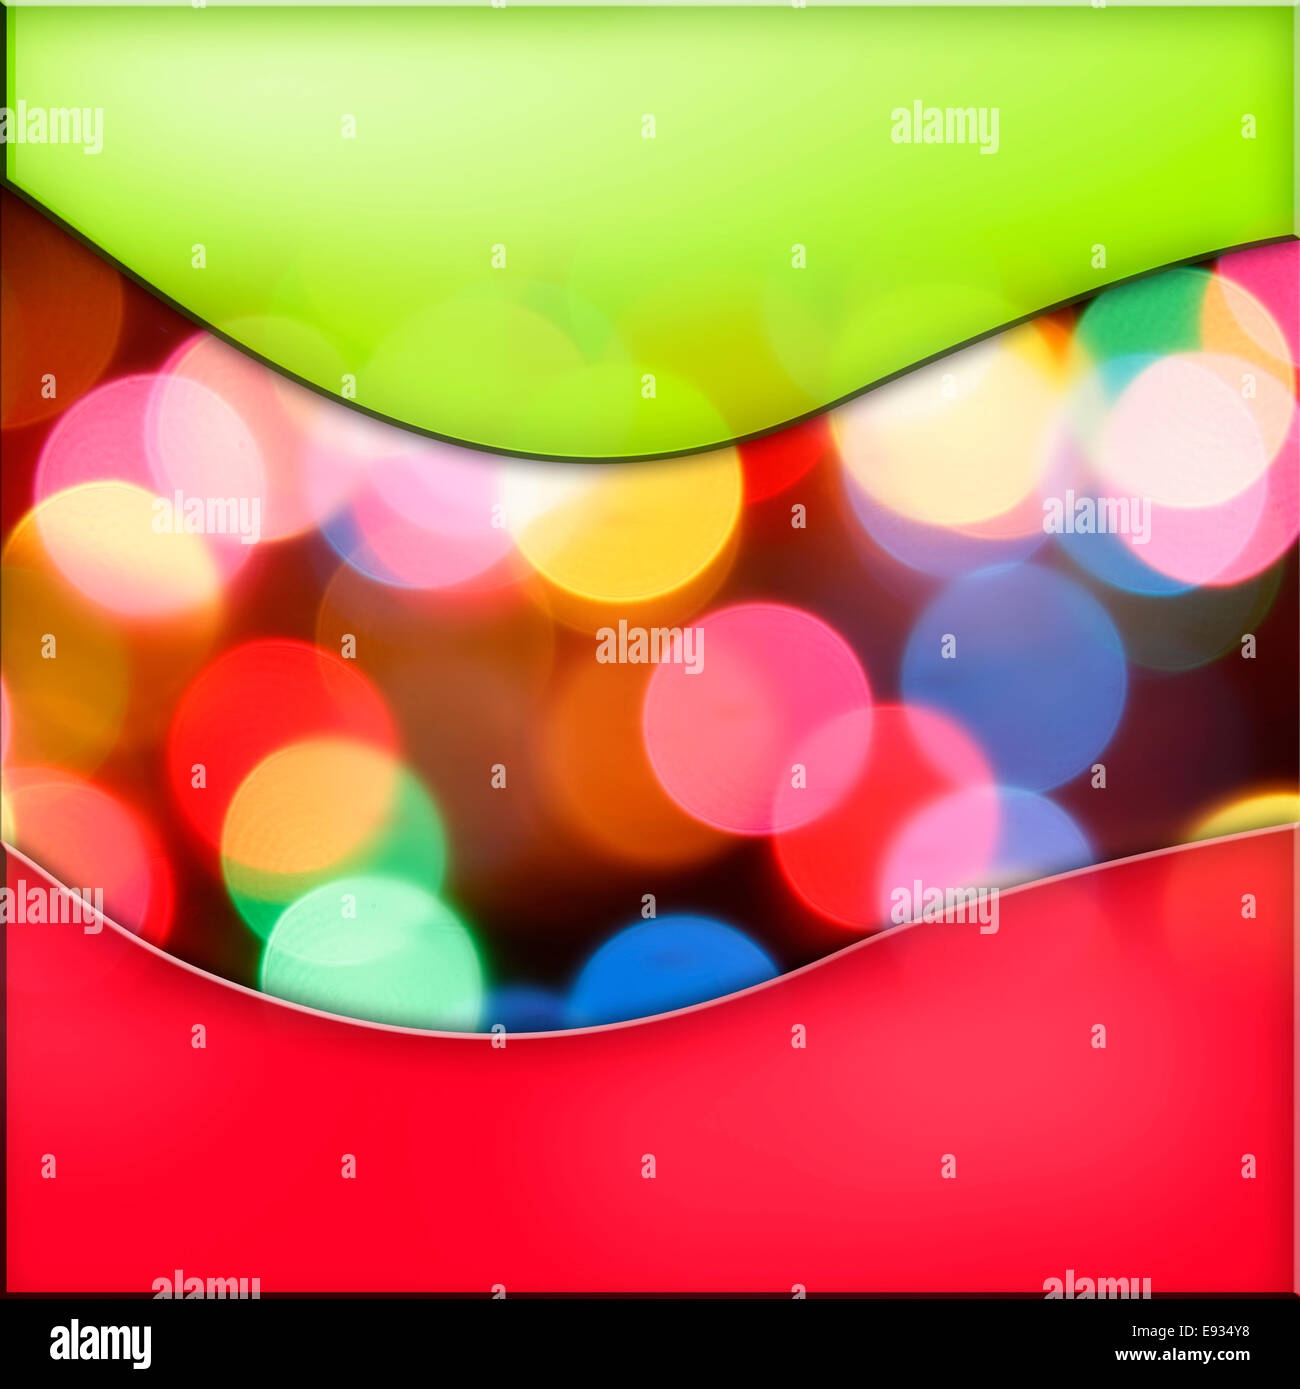 Colorful circles of light abstract background with green and red borders  Stock Photo - Alamy